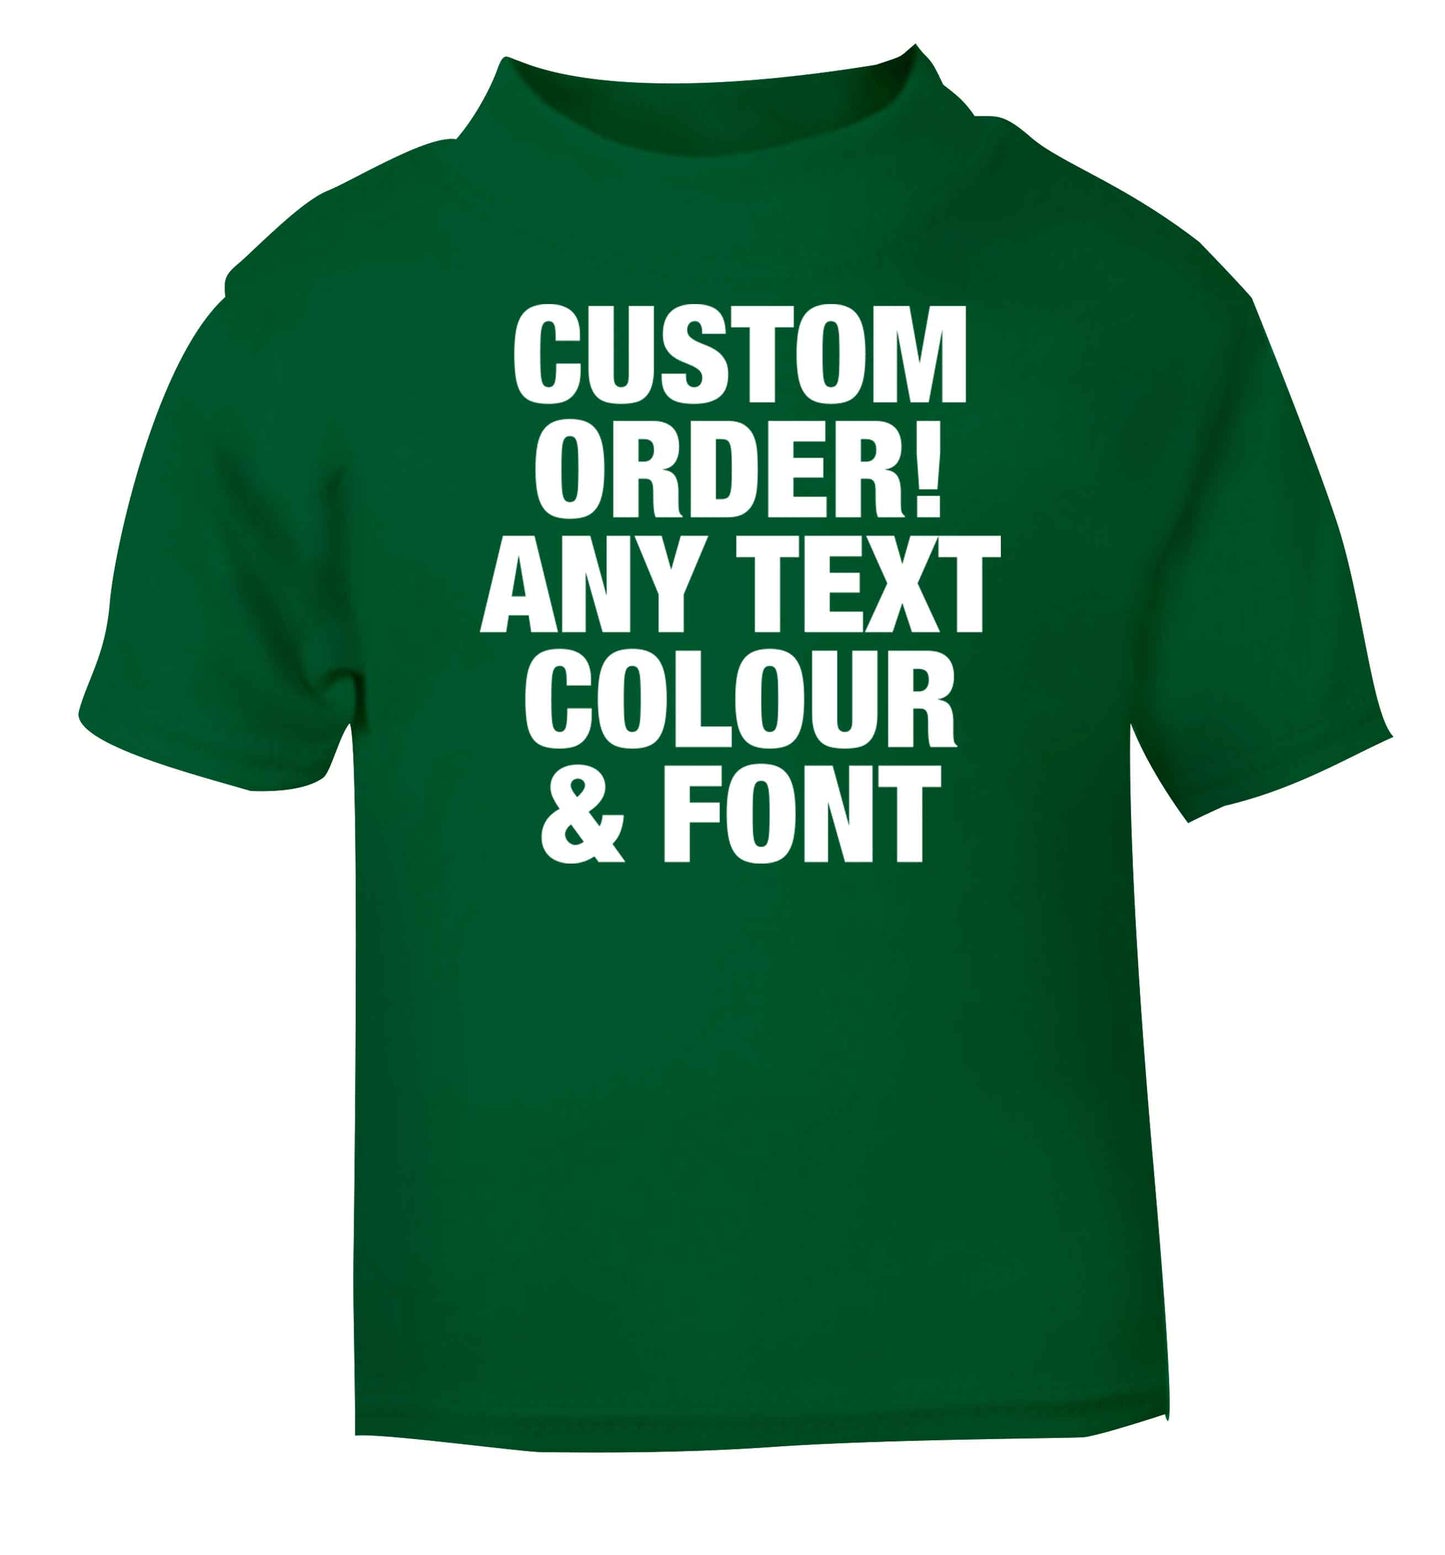 Custom order any text colour and font green baby toddler Tshirt 2 Years